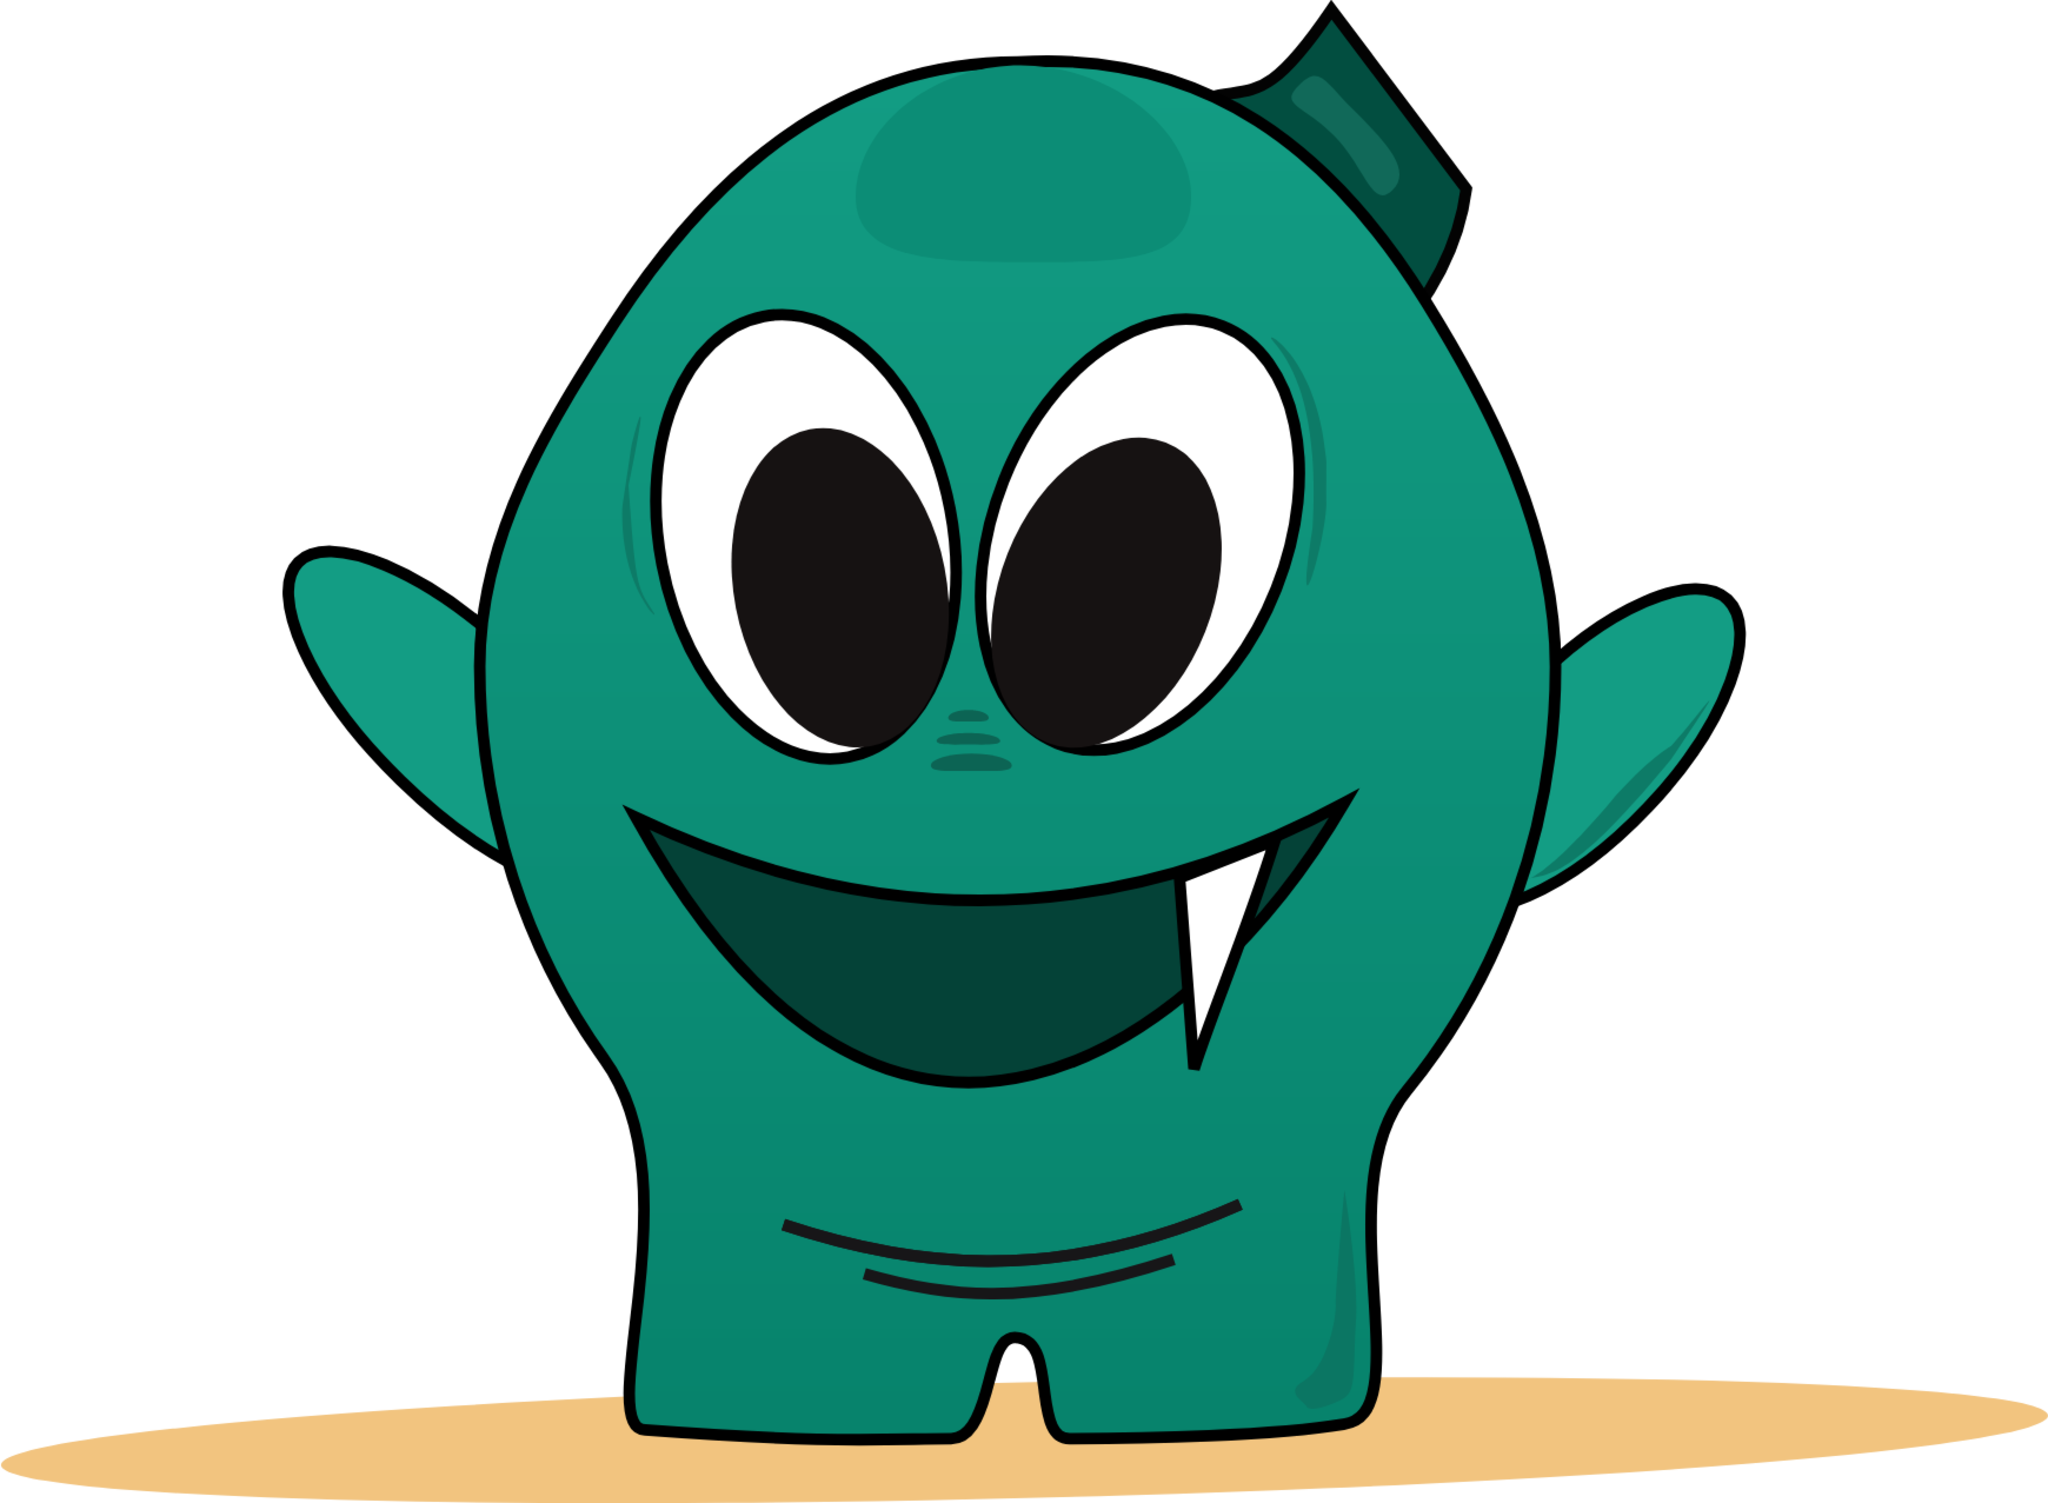 cute green baby monster icon